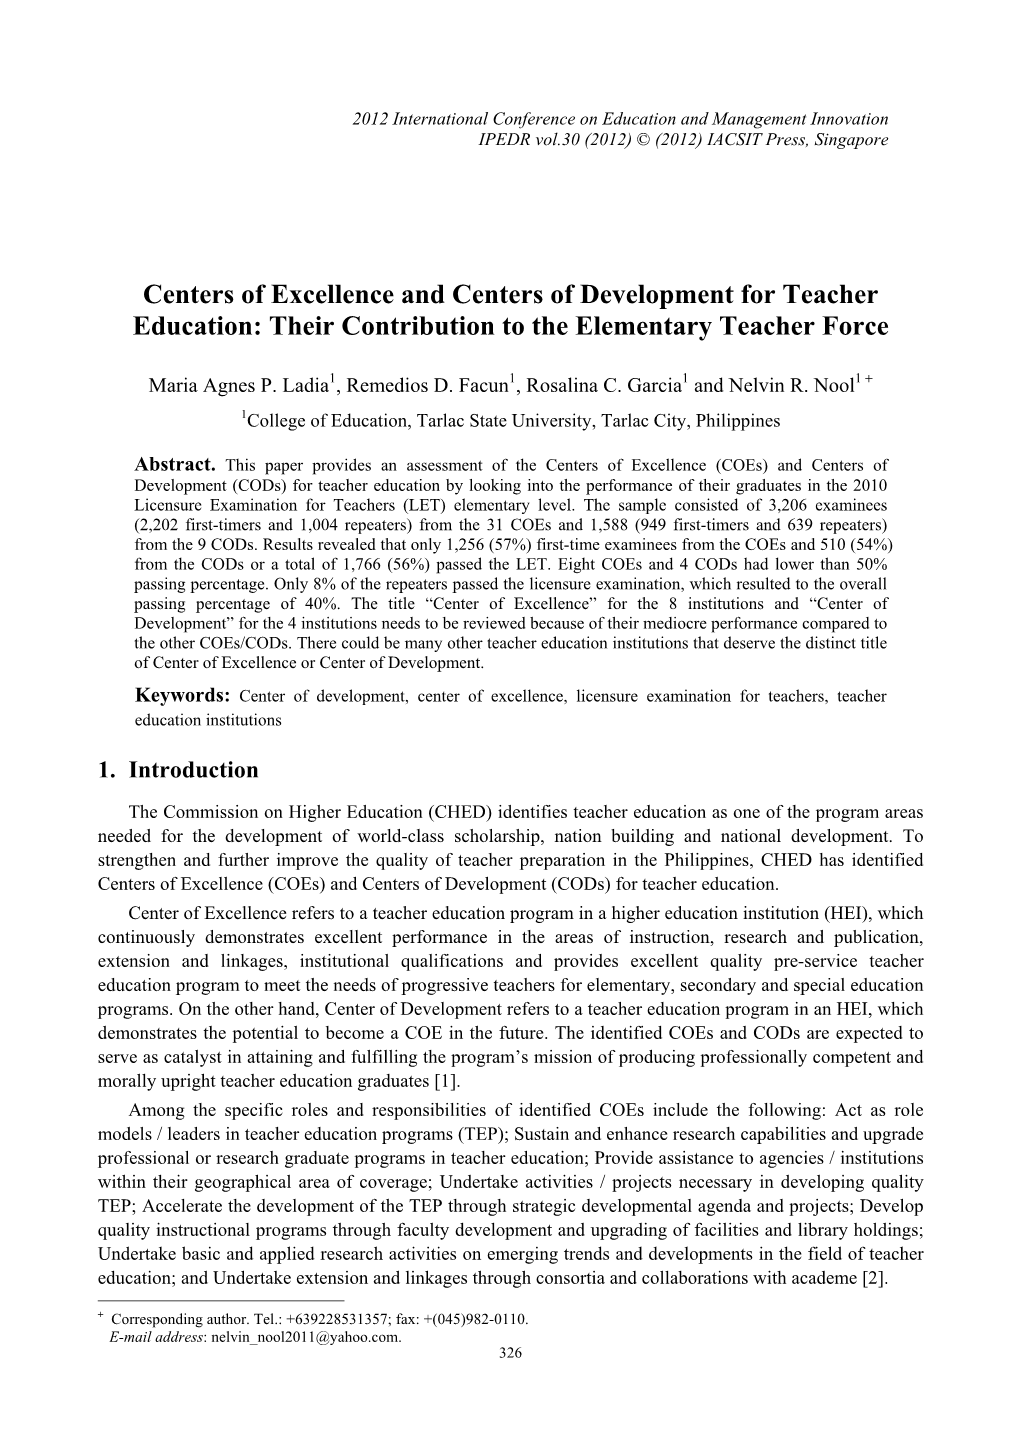 Centers of Excellence and Centers of Development for Teacher Education: Their Contribution to the Elementary Teacher Force